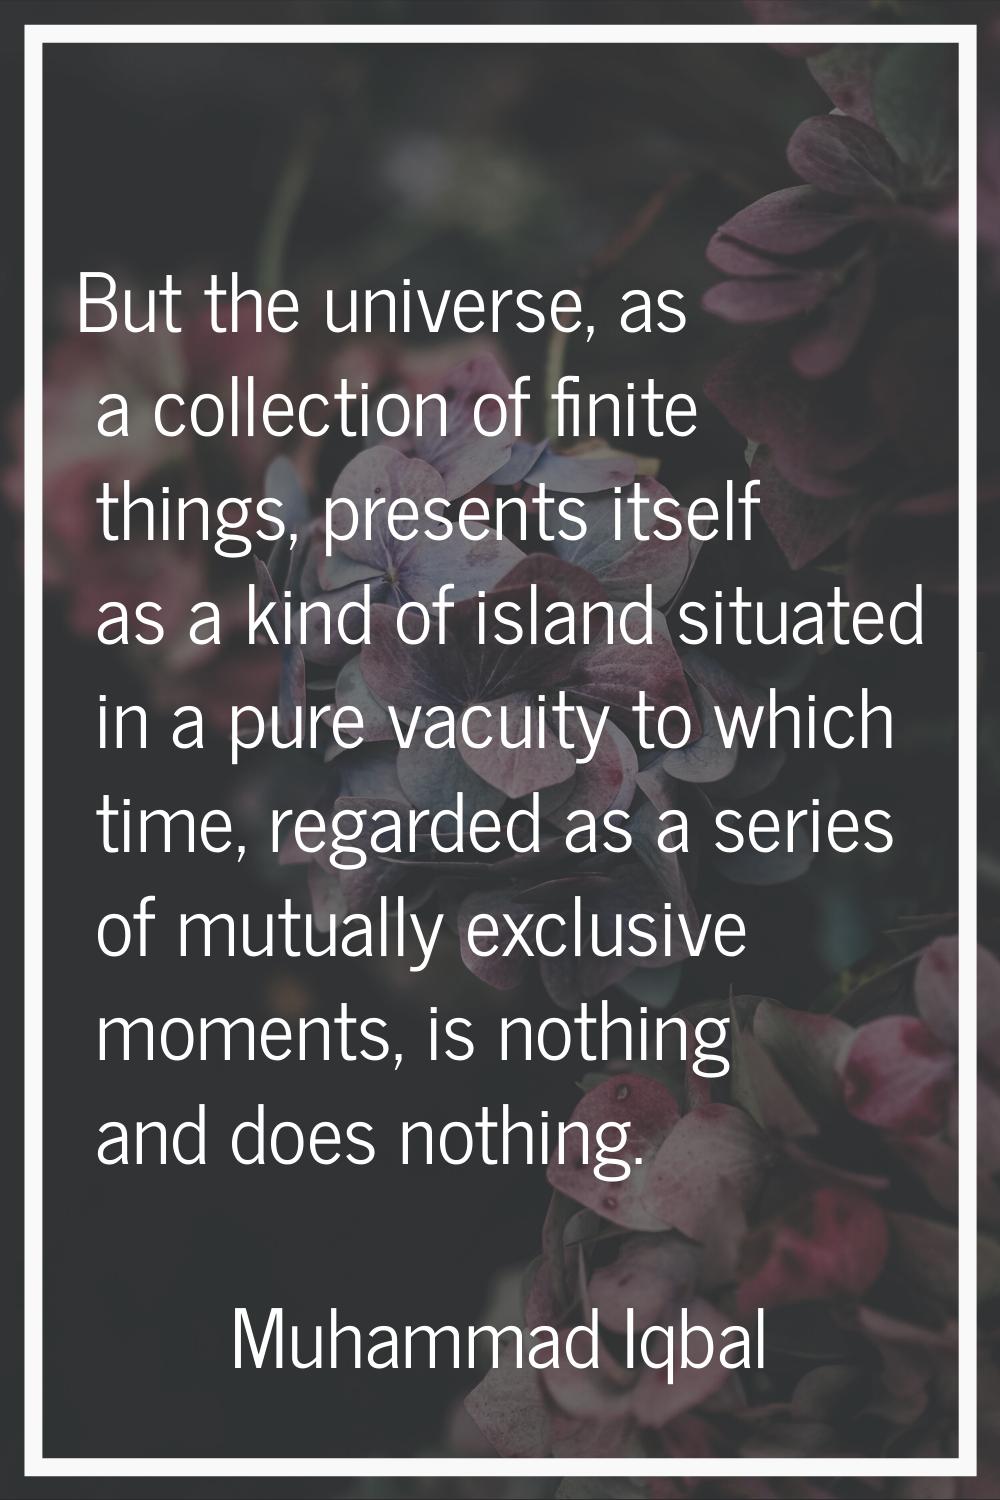 But the universe, as a collection of finite things, presents itself as a kind of island situated in